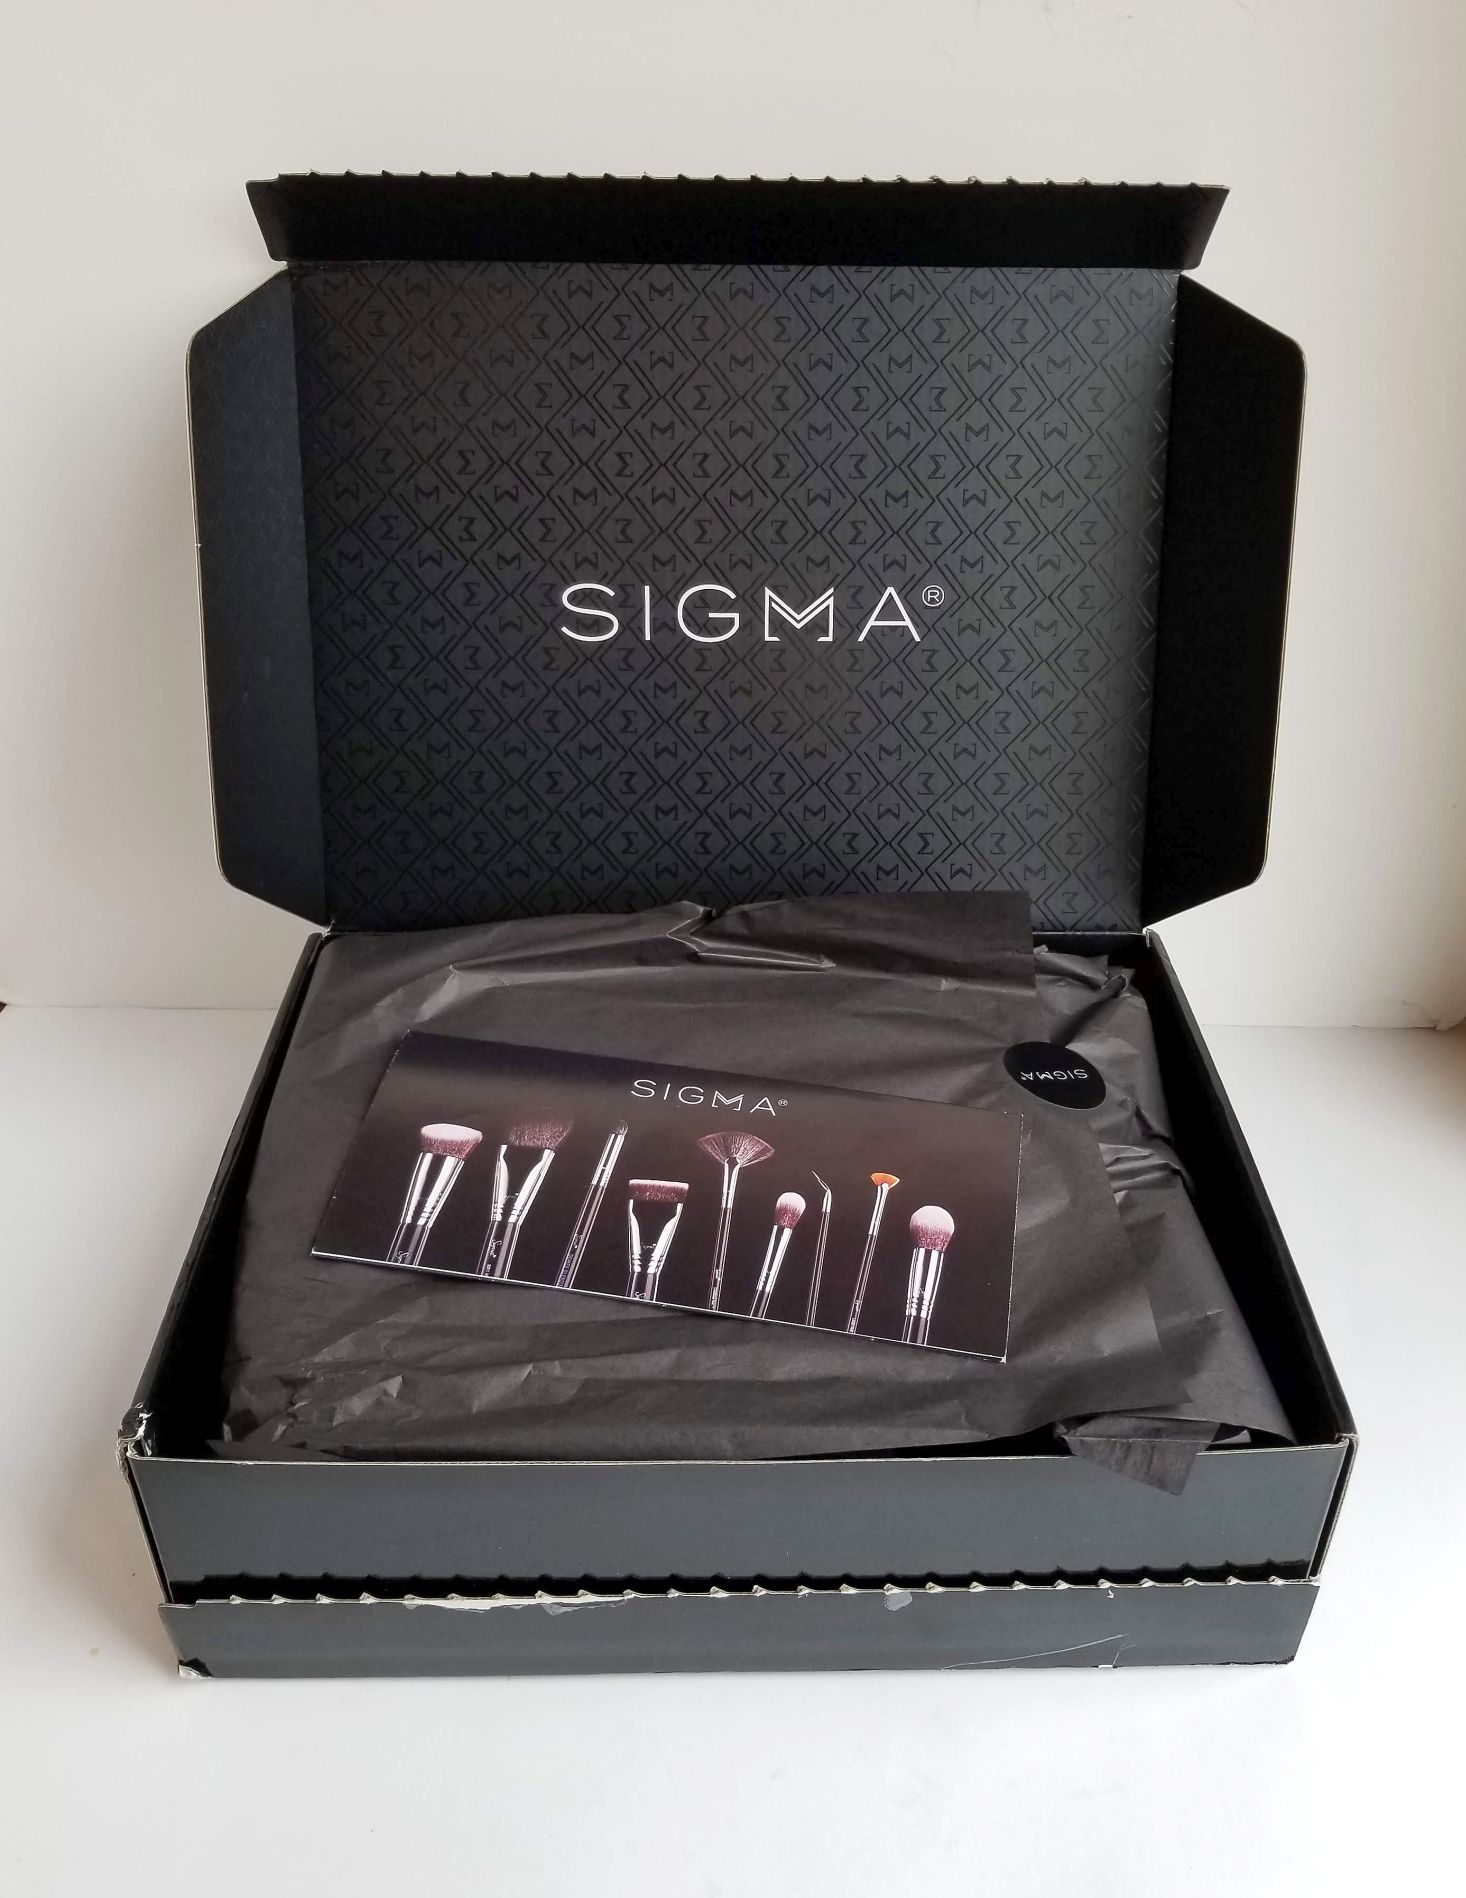 Sigma Deluxe Mystery Haul Review – December 2018